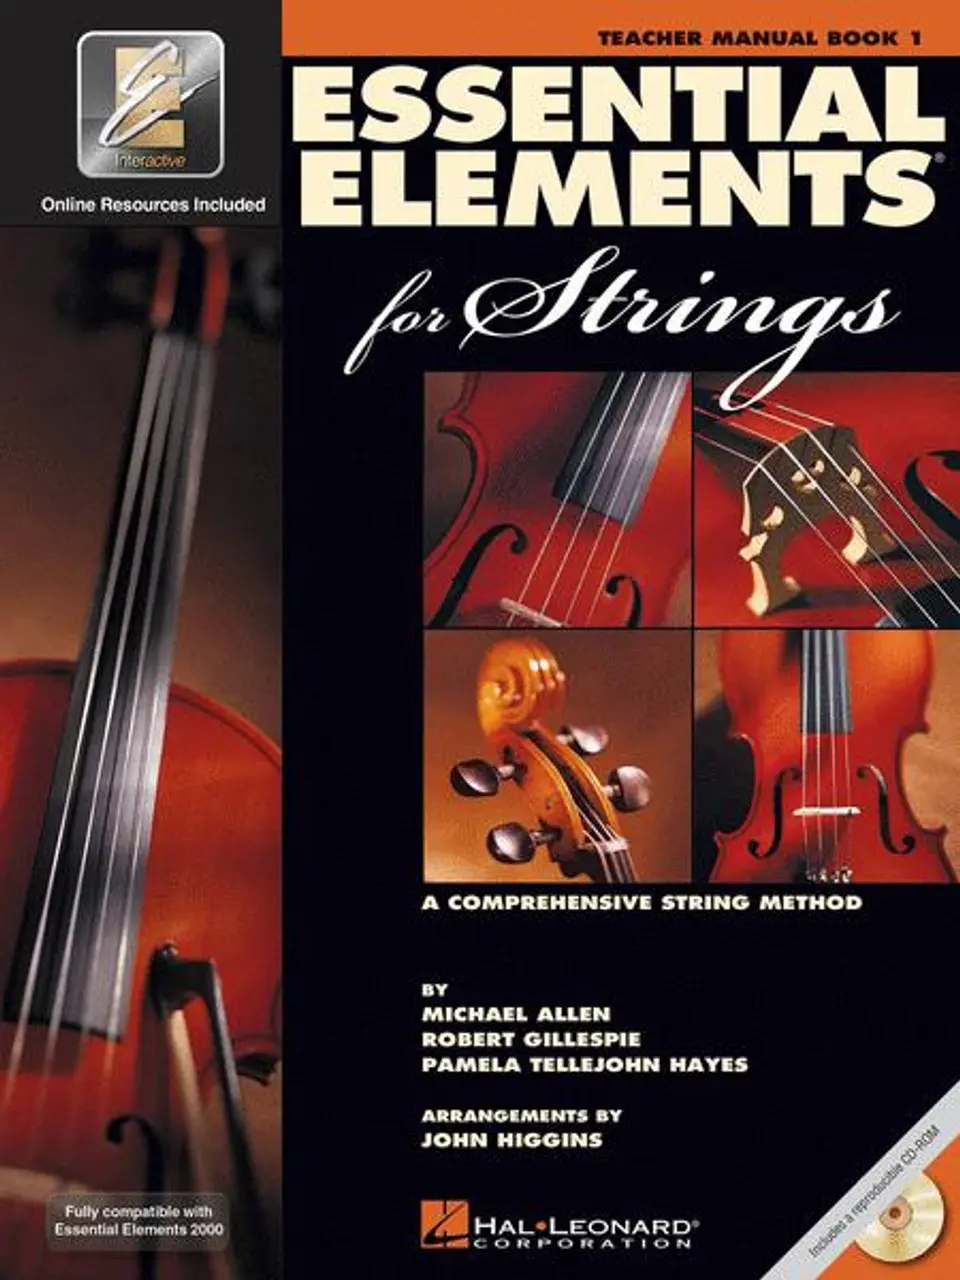 essential elements interactive violin - What is essential elements interactive